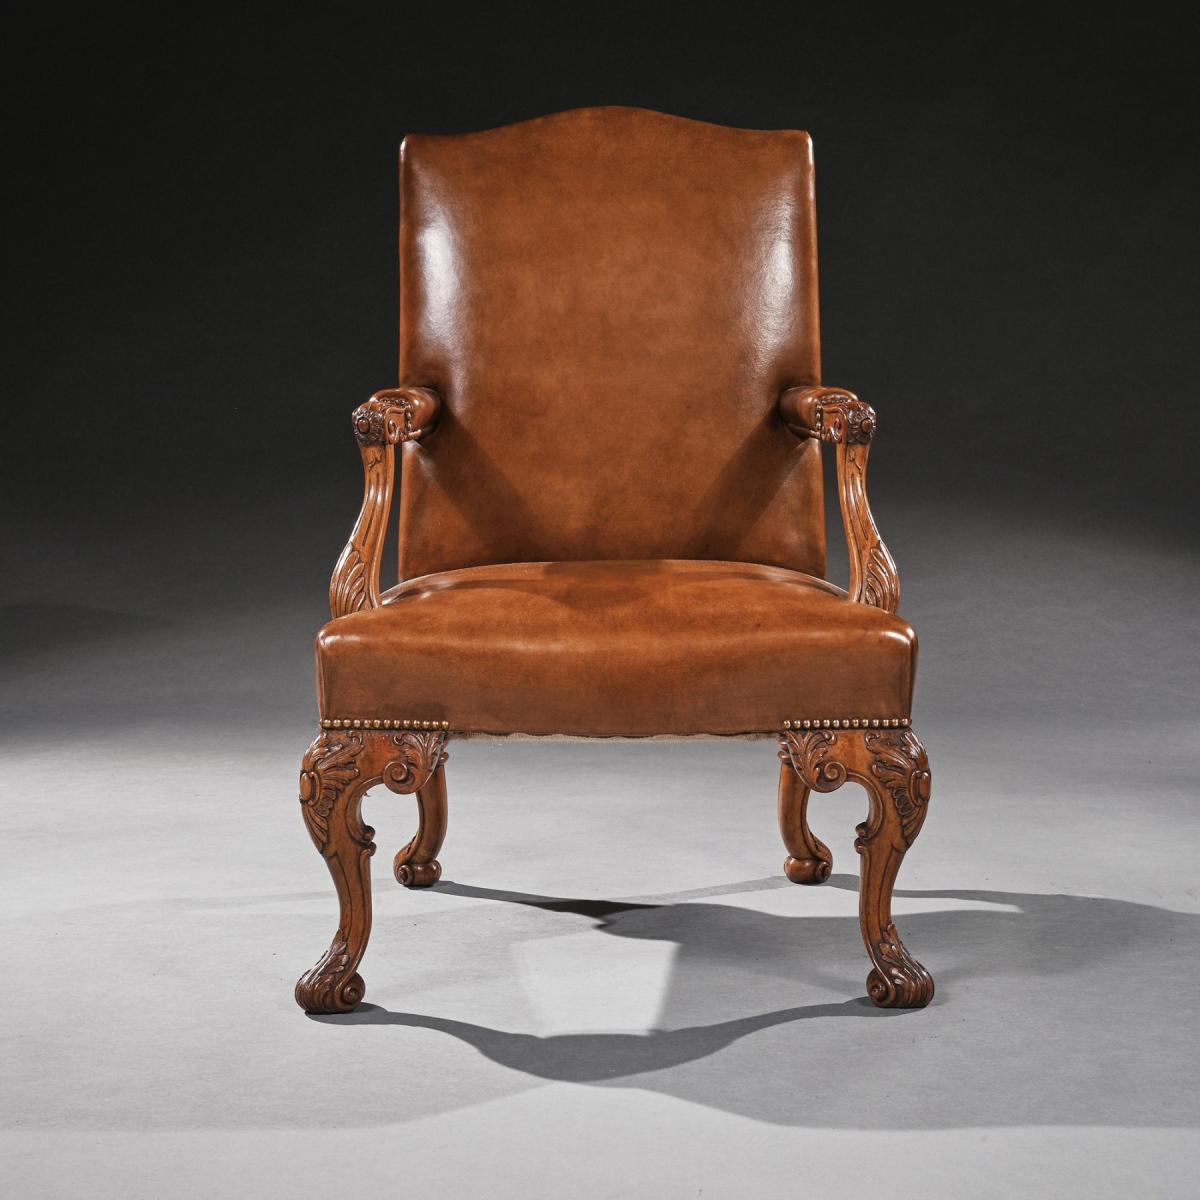 Early 20th Century Walnut Carved Leather Upholstery Armchair